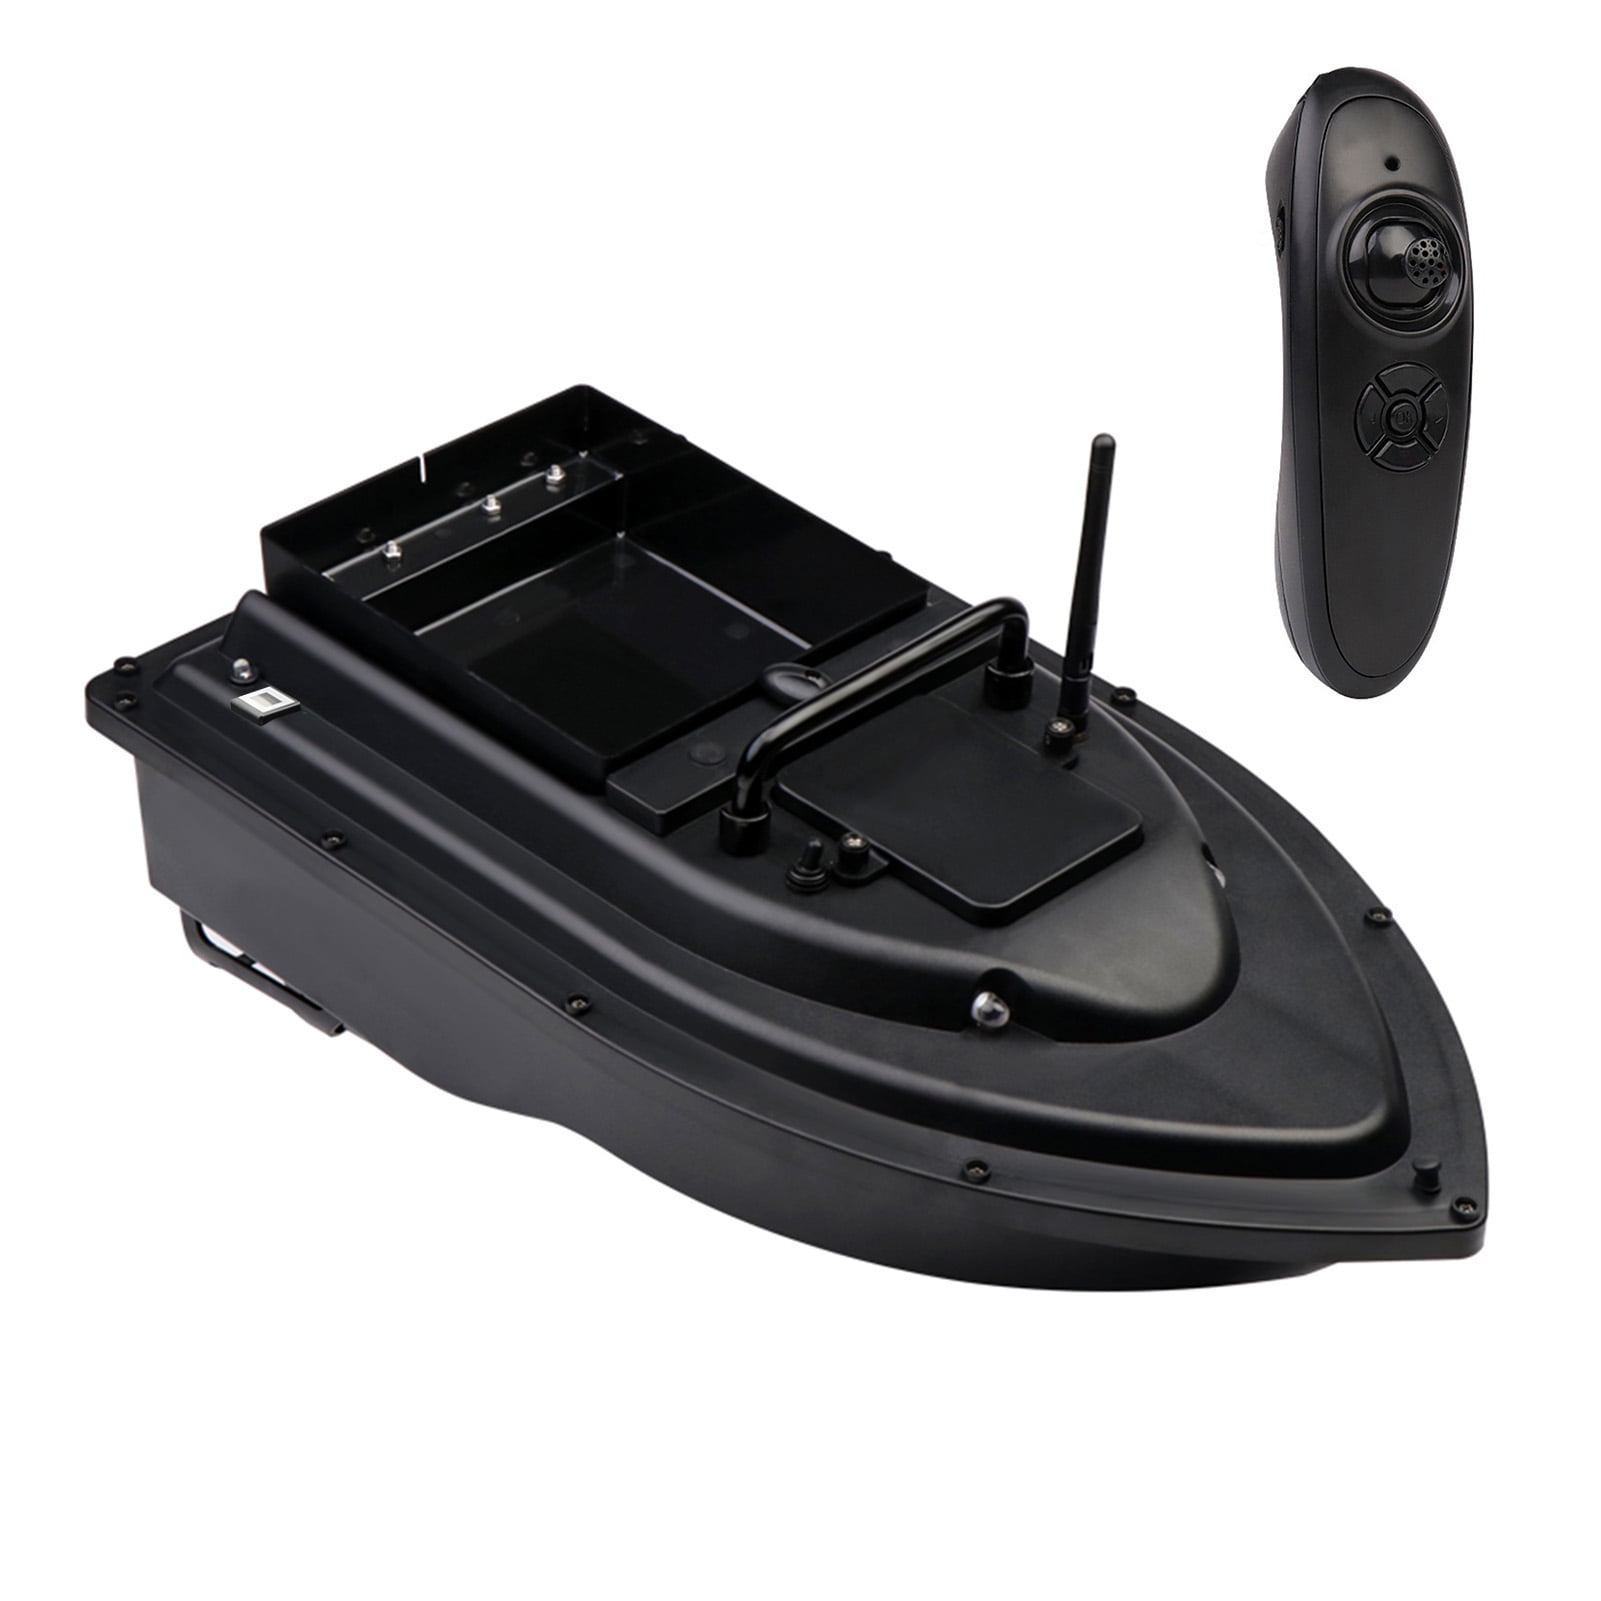 MIXFEER RC Fishing Bait Boat RC Boat Fish Finder 0.75kg Loading